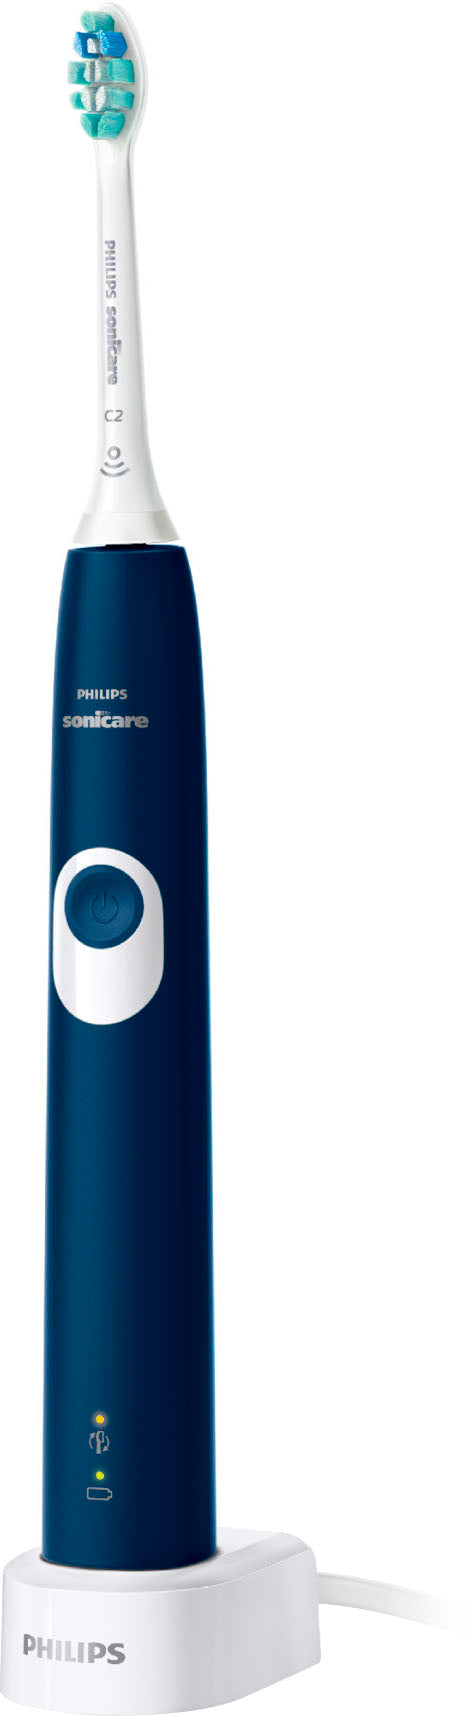 Philips Sonicare ProtectiveClean 4100 Plaque Control, Rechargeable electric toothbrush with pressure sensor, Navy Blue - Navy_0